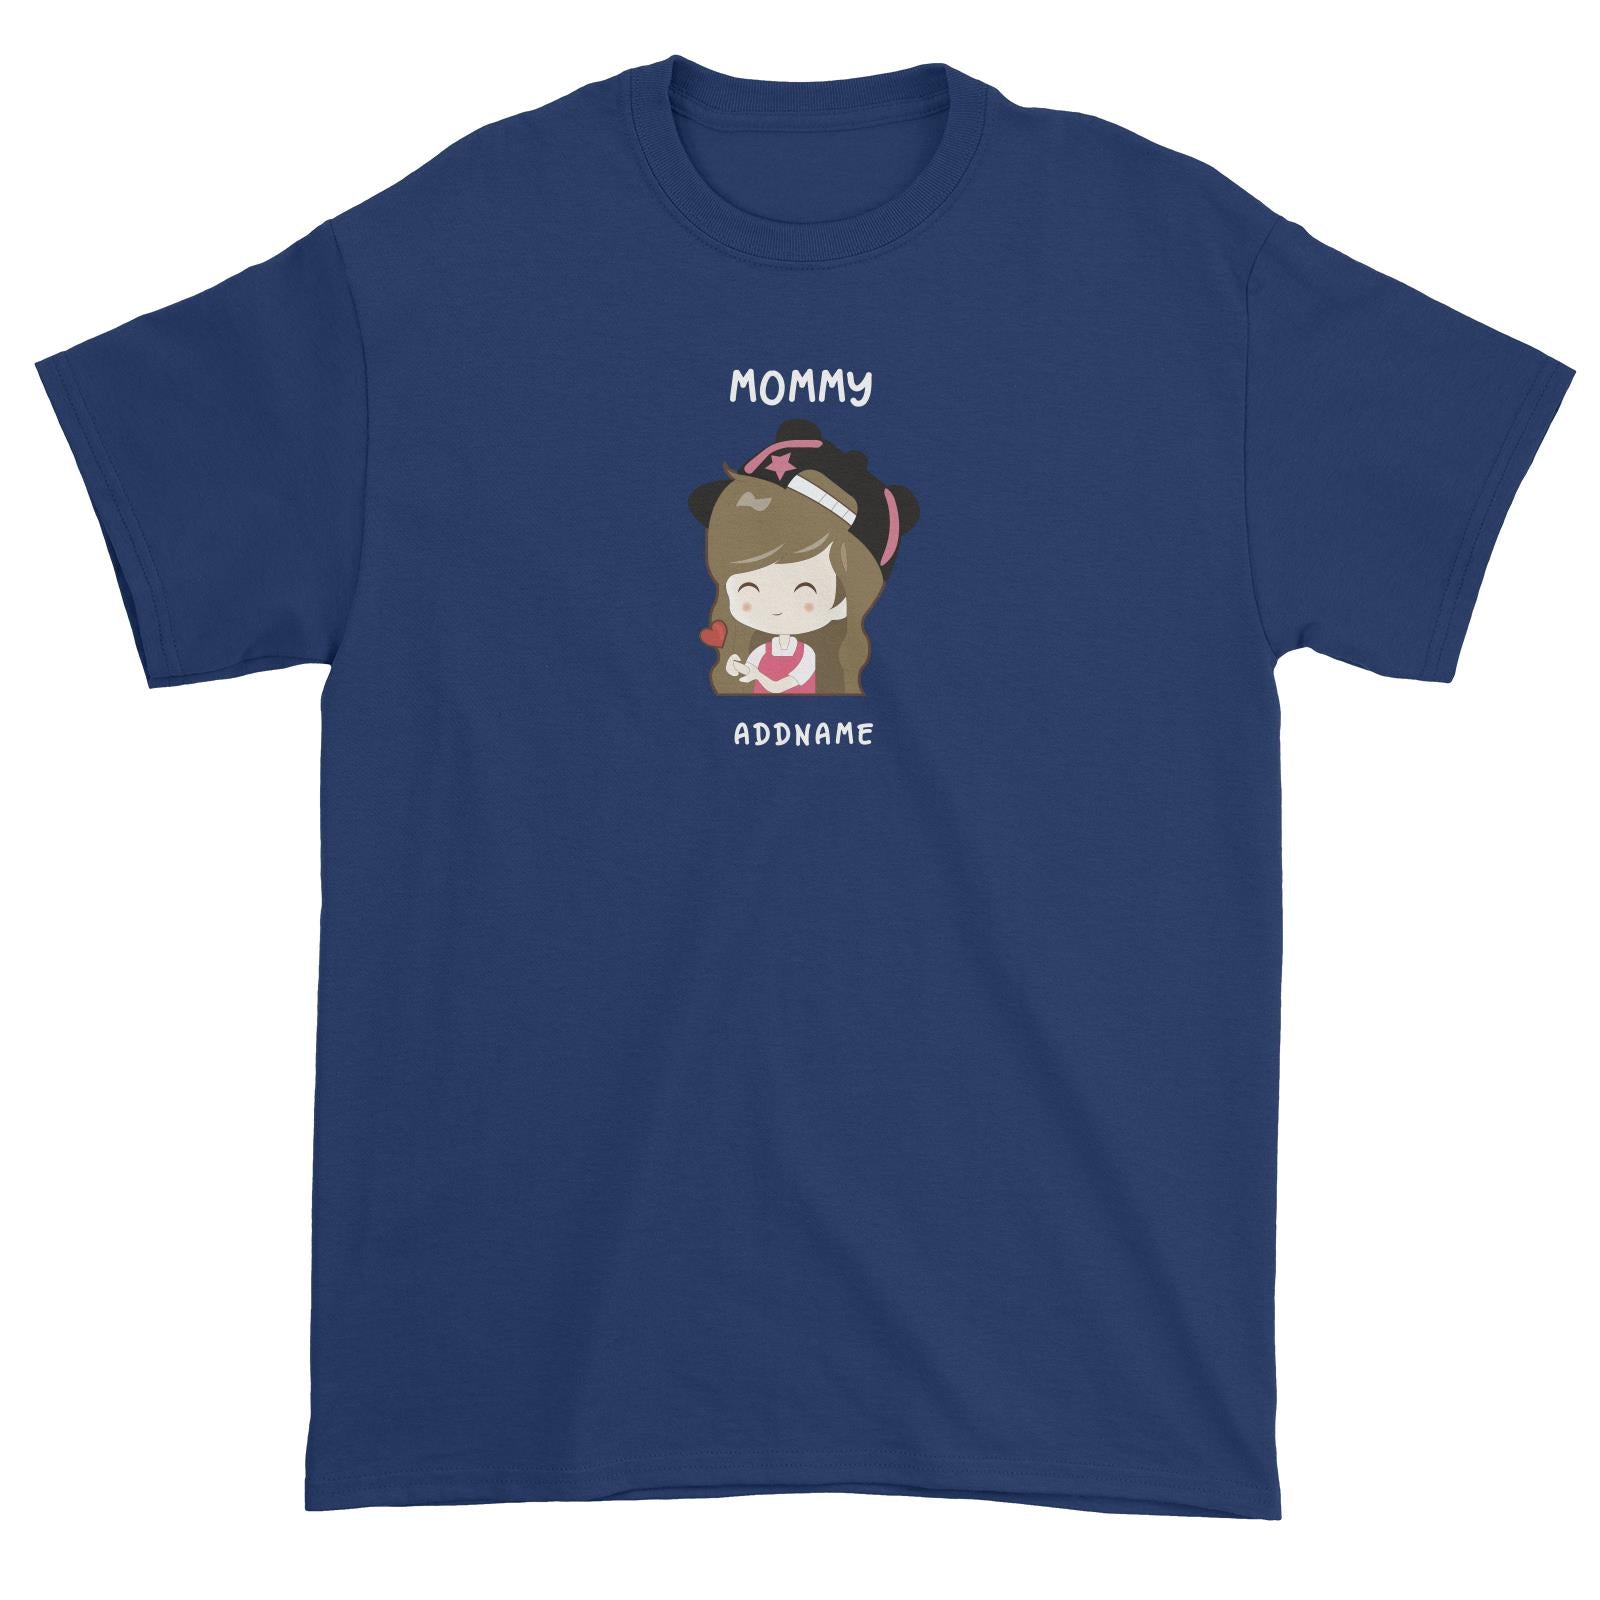 My Lovely Family Series Mommy Addname Unisex T-Shirt